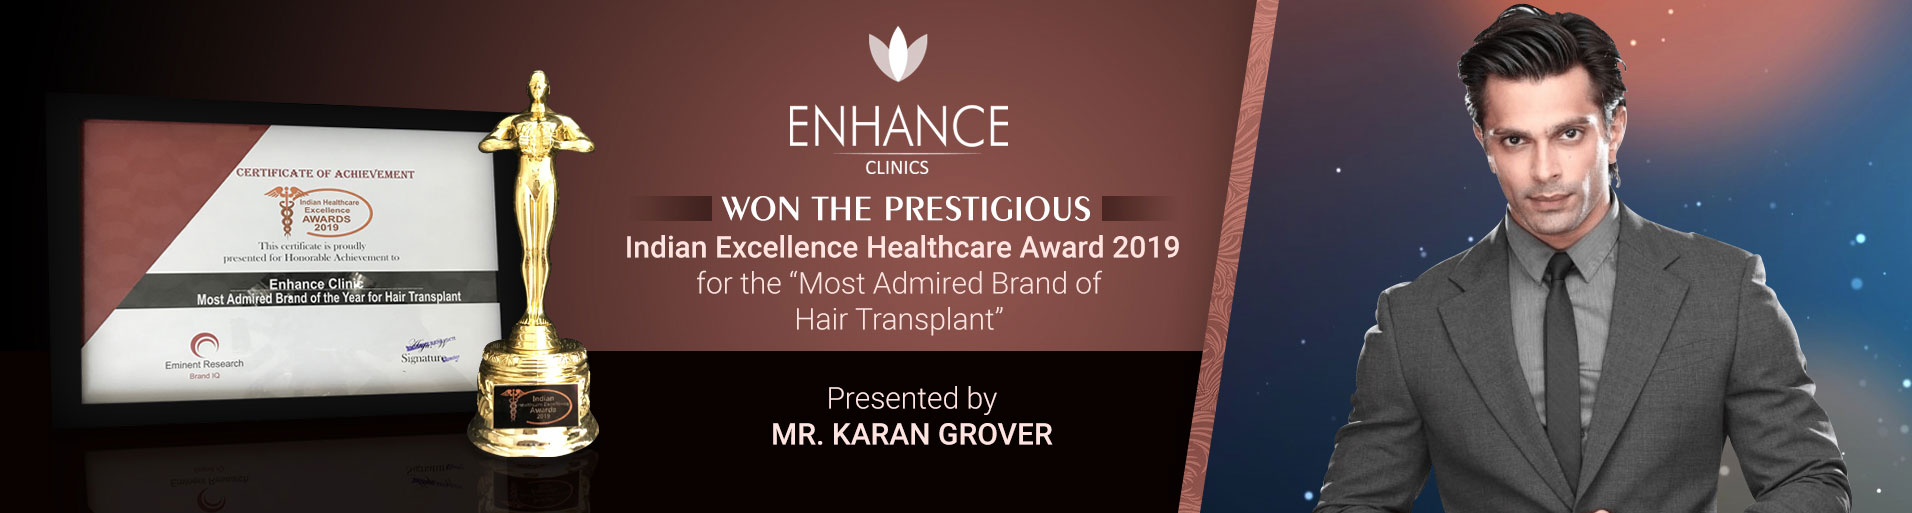 Indian Excellence Healthcare Award for Admired Brand of Hair Transplant